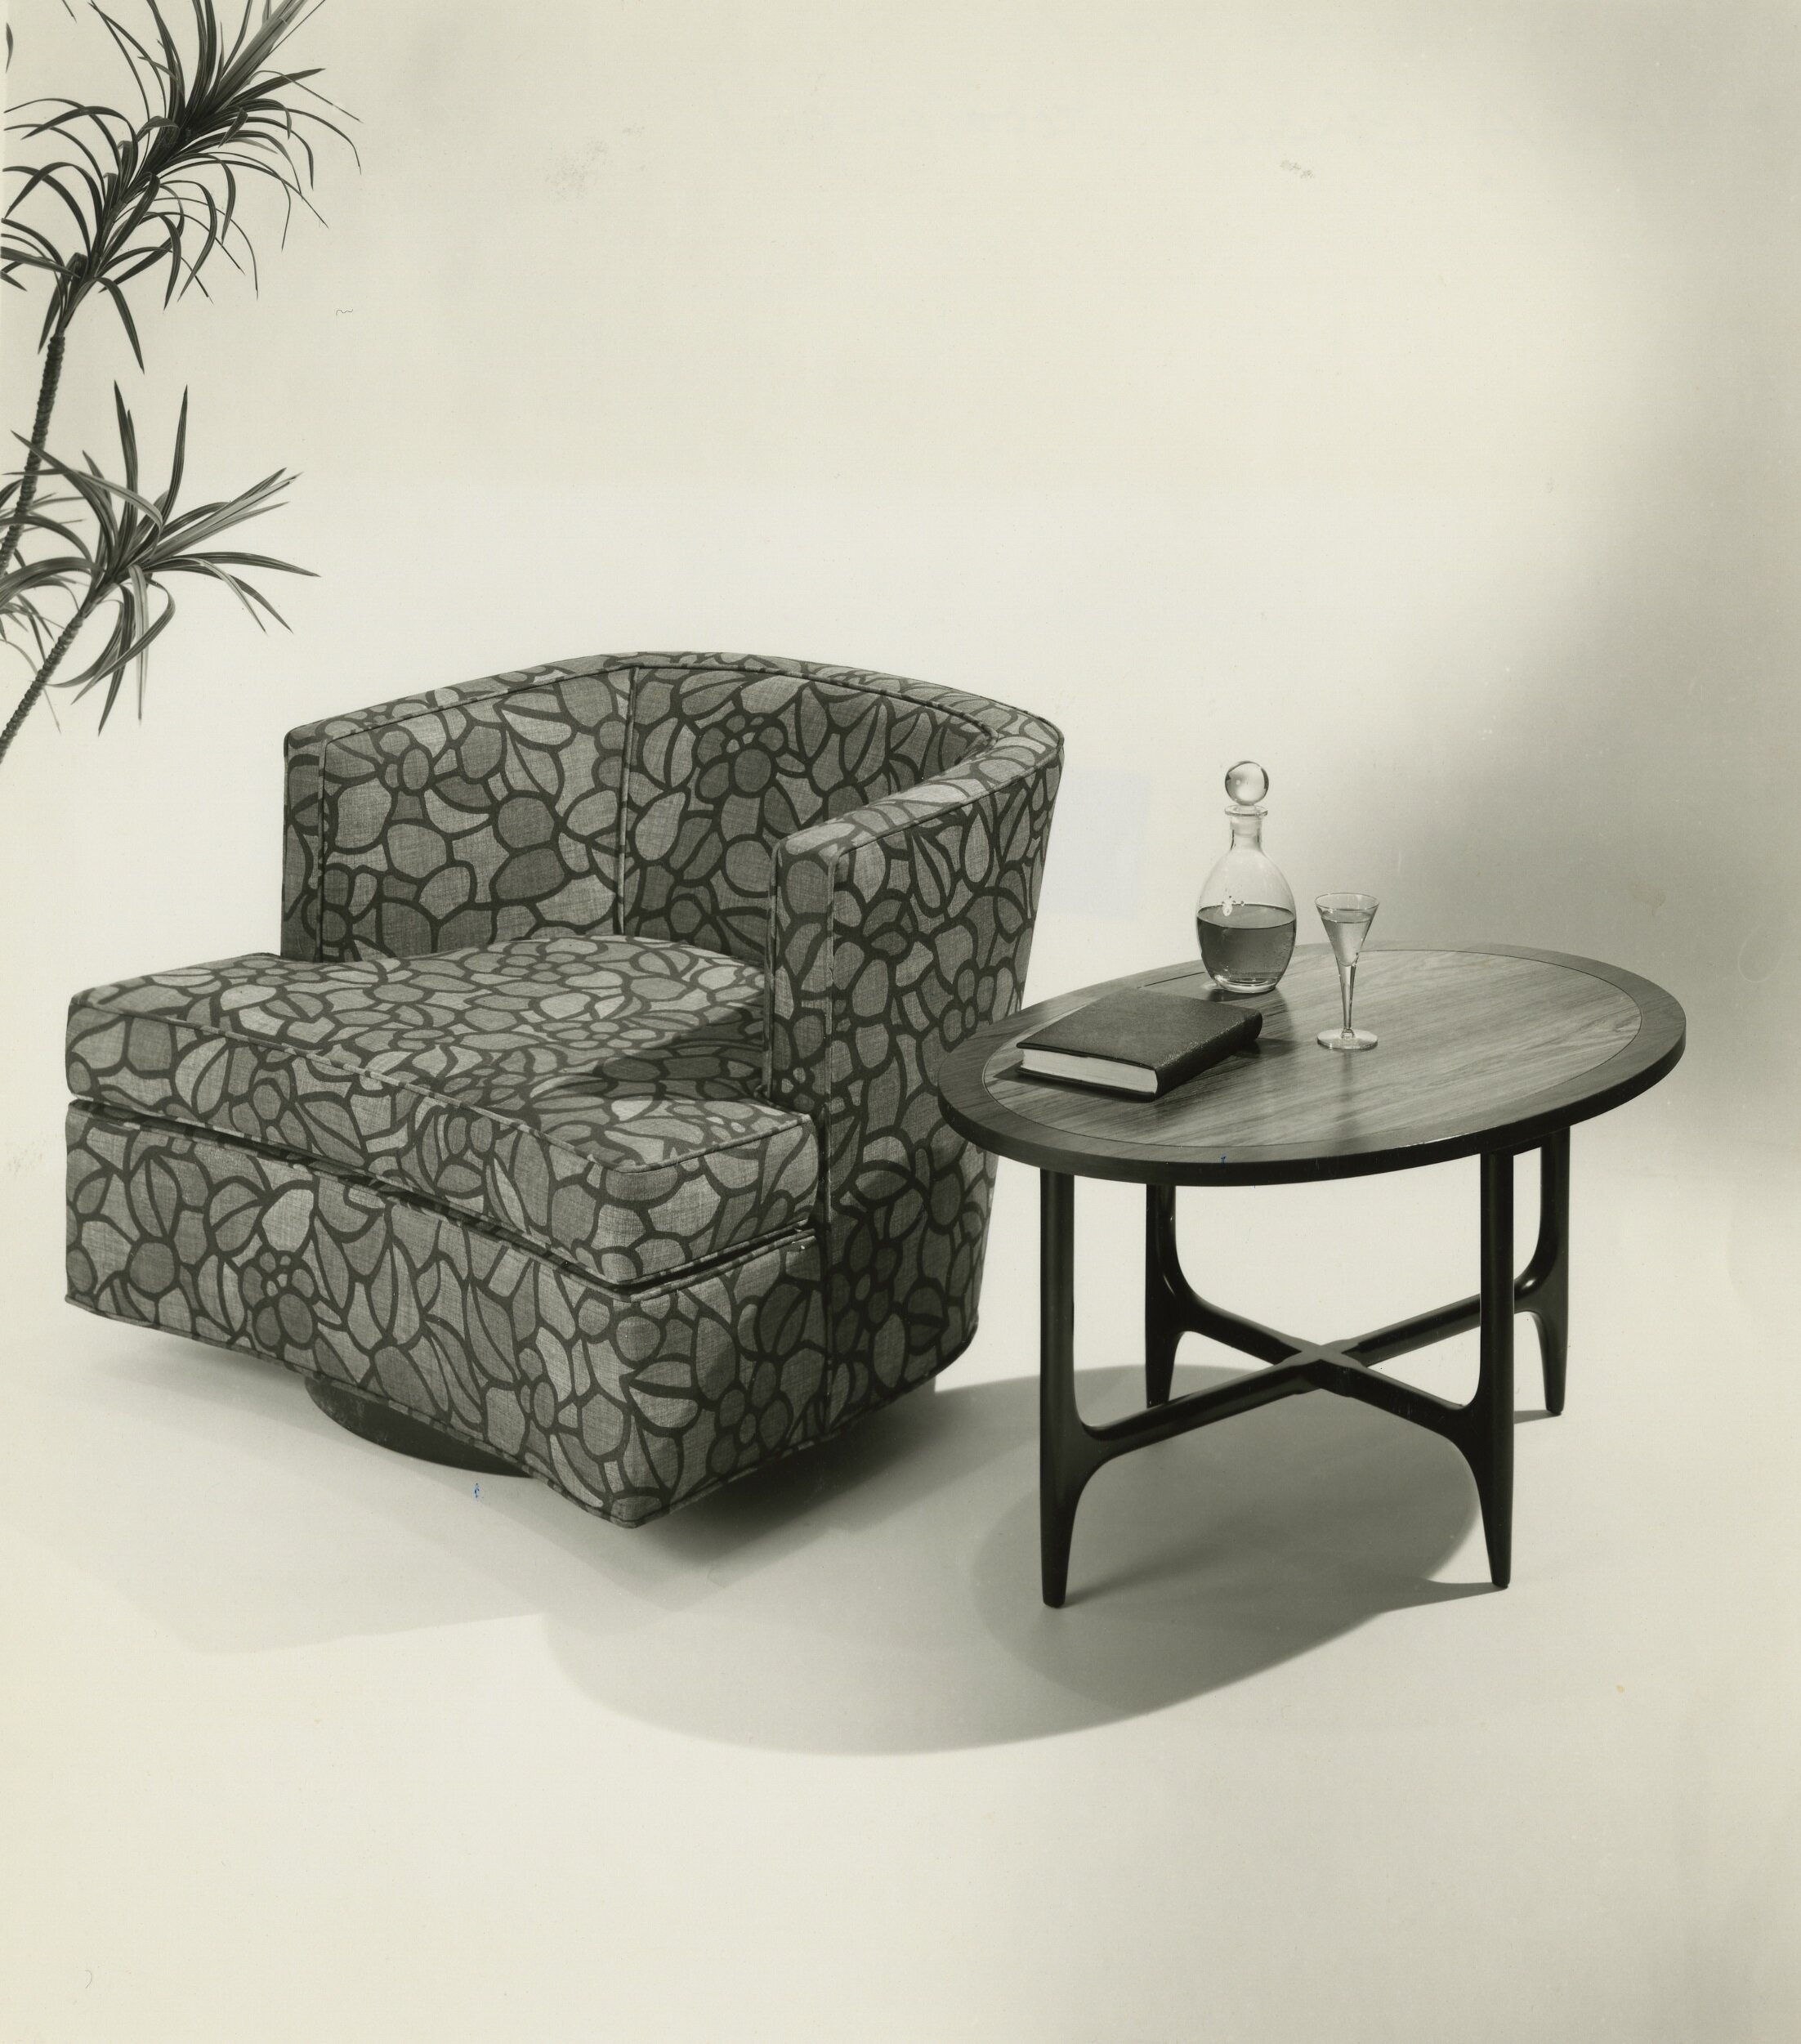 Round chair and table.jpg